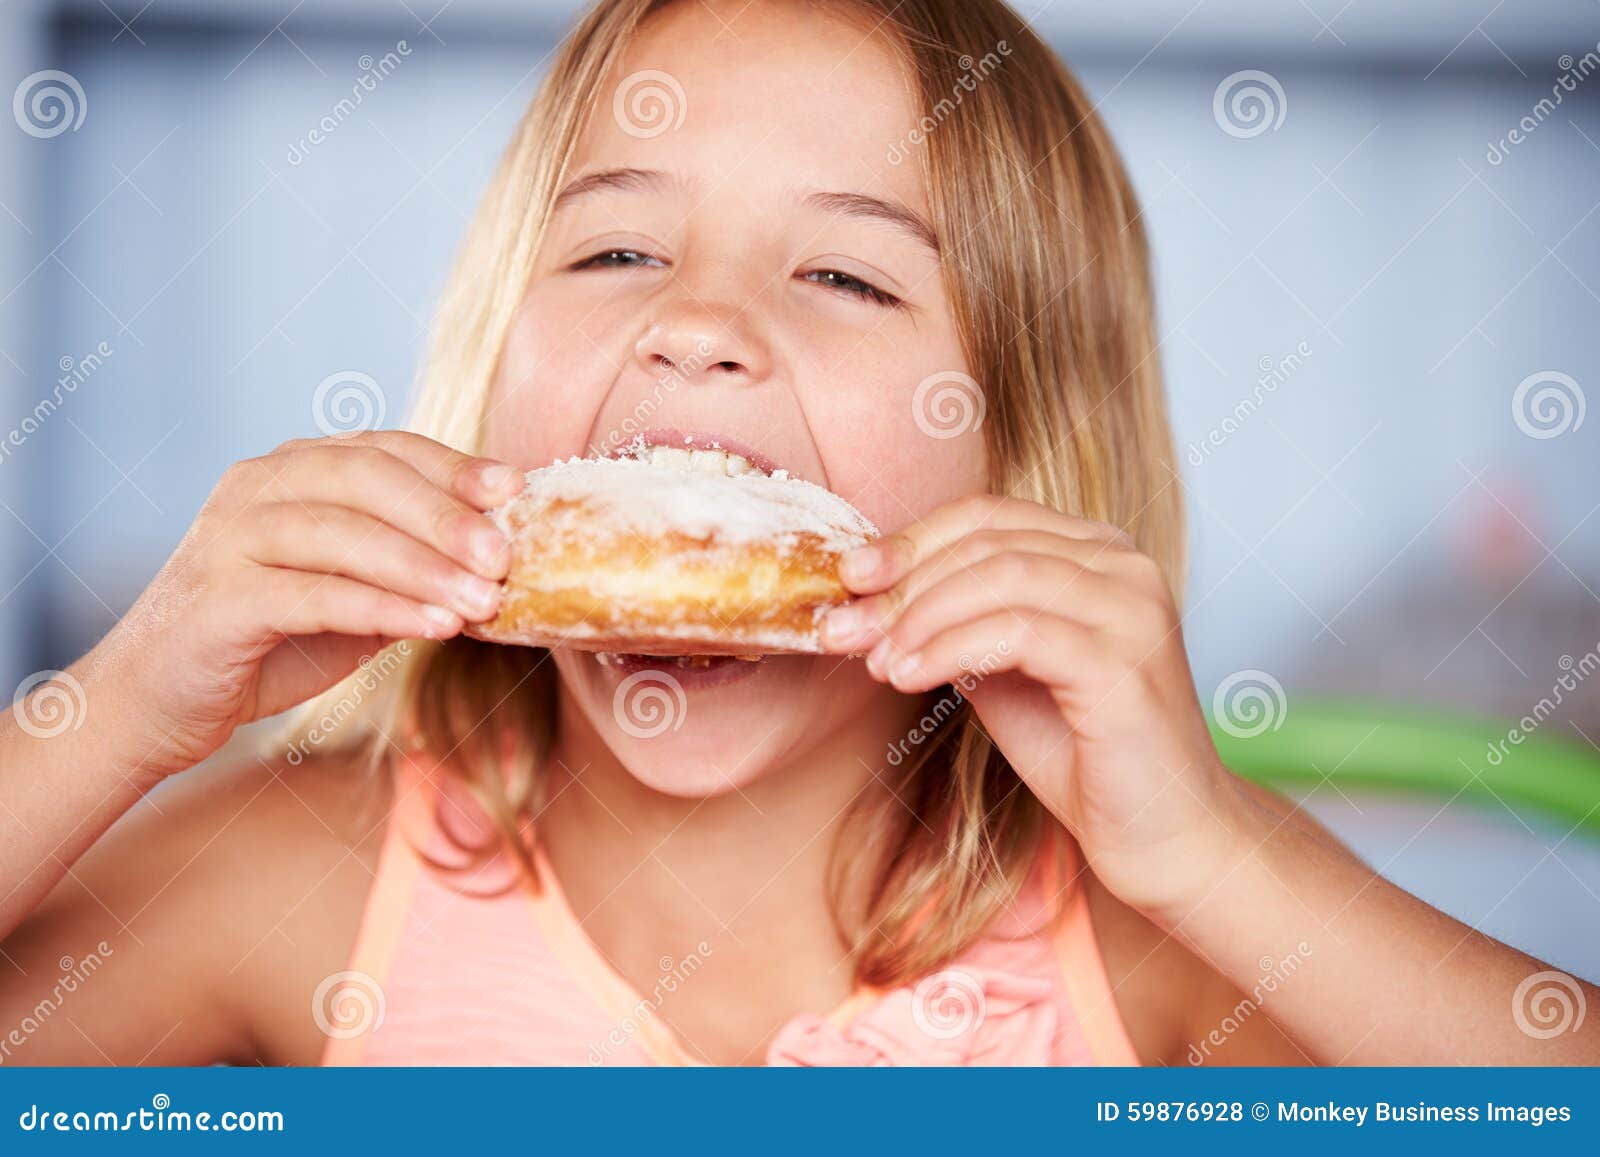 young girl sitting at table eating sugary donut